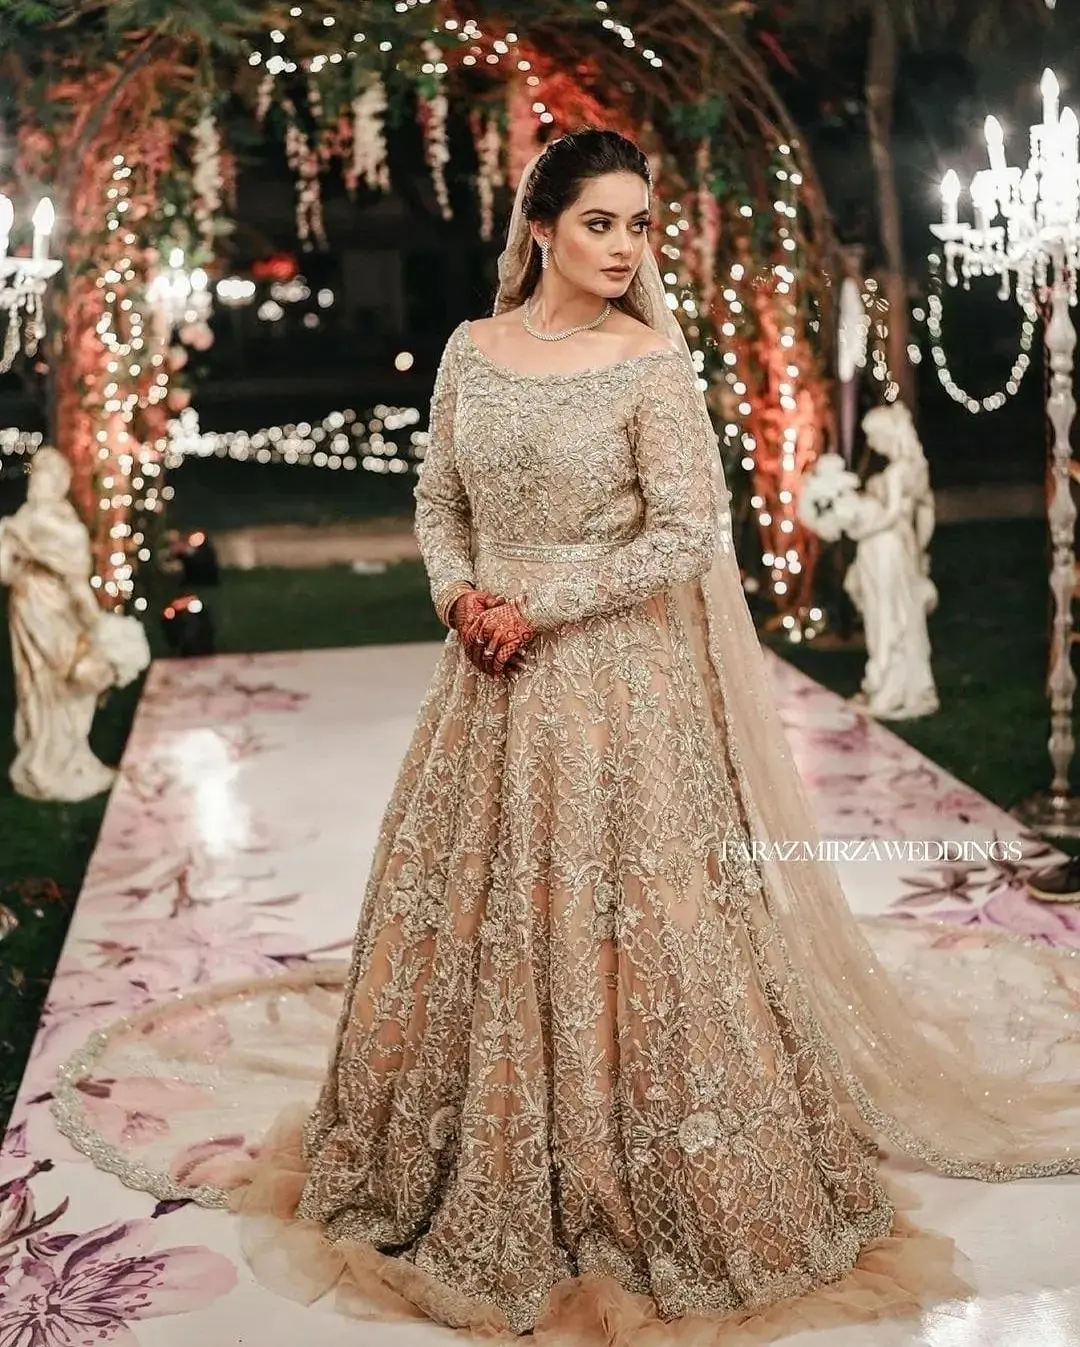 5 Bollywood brides who chose pastel wedding outfits